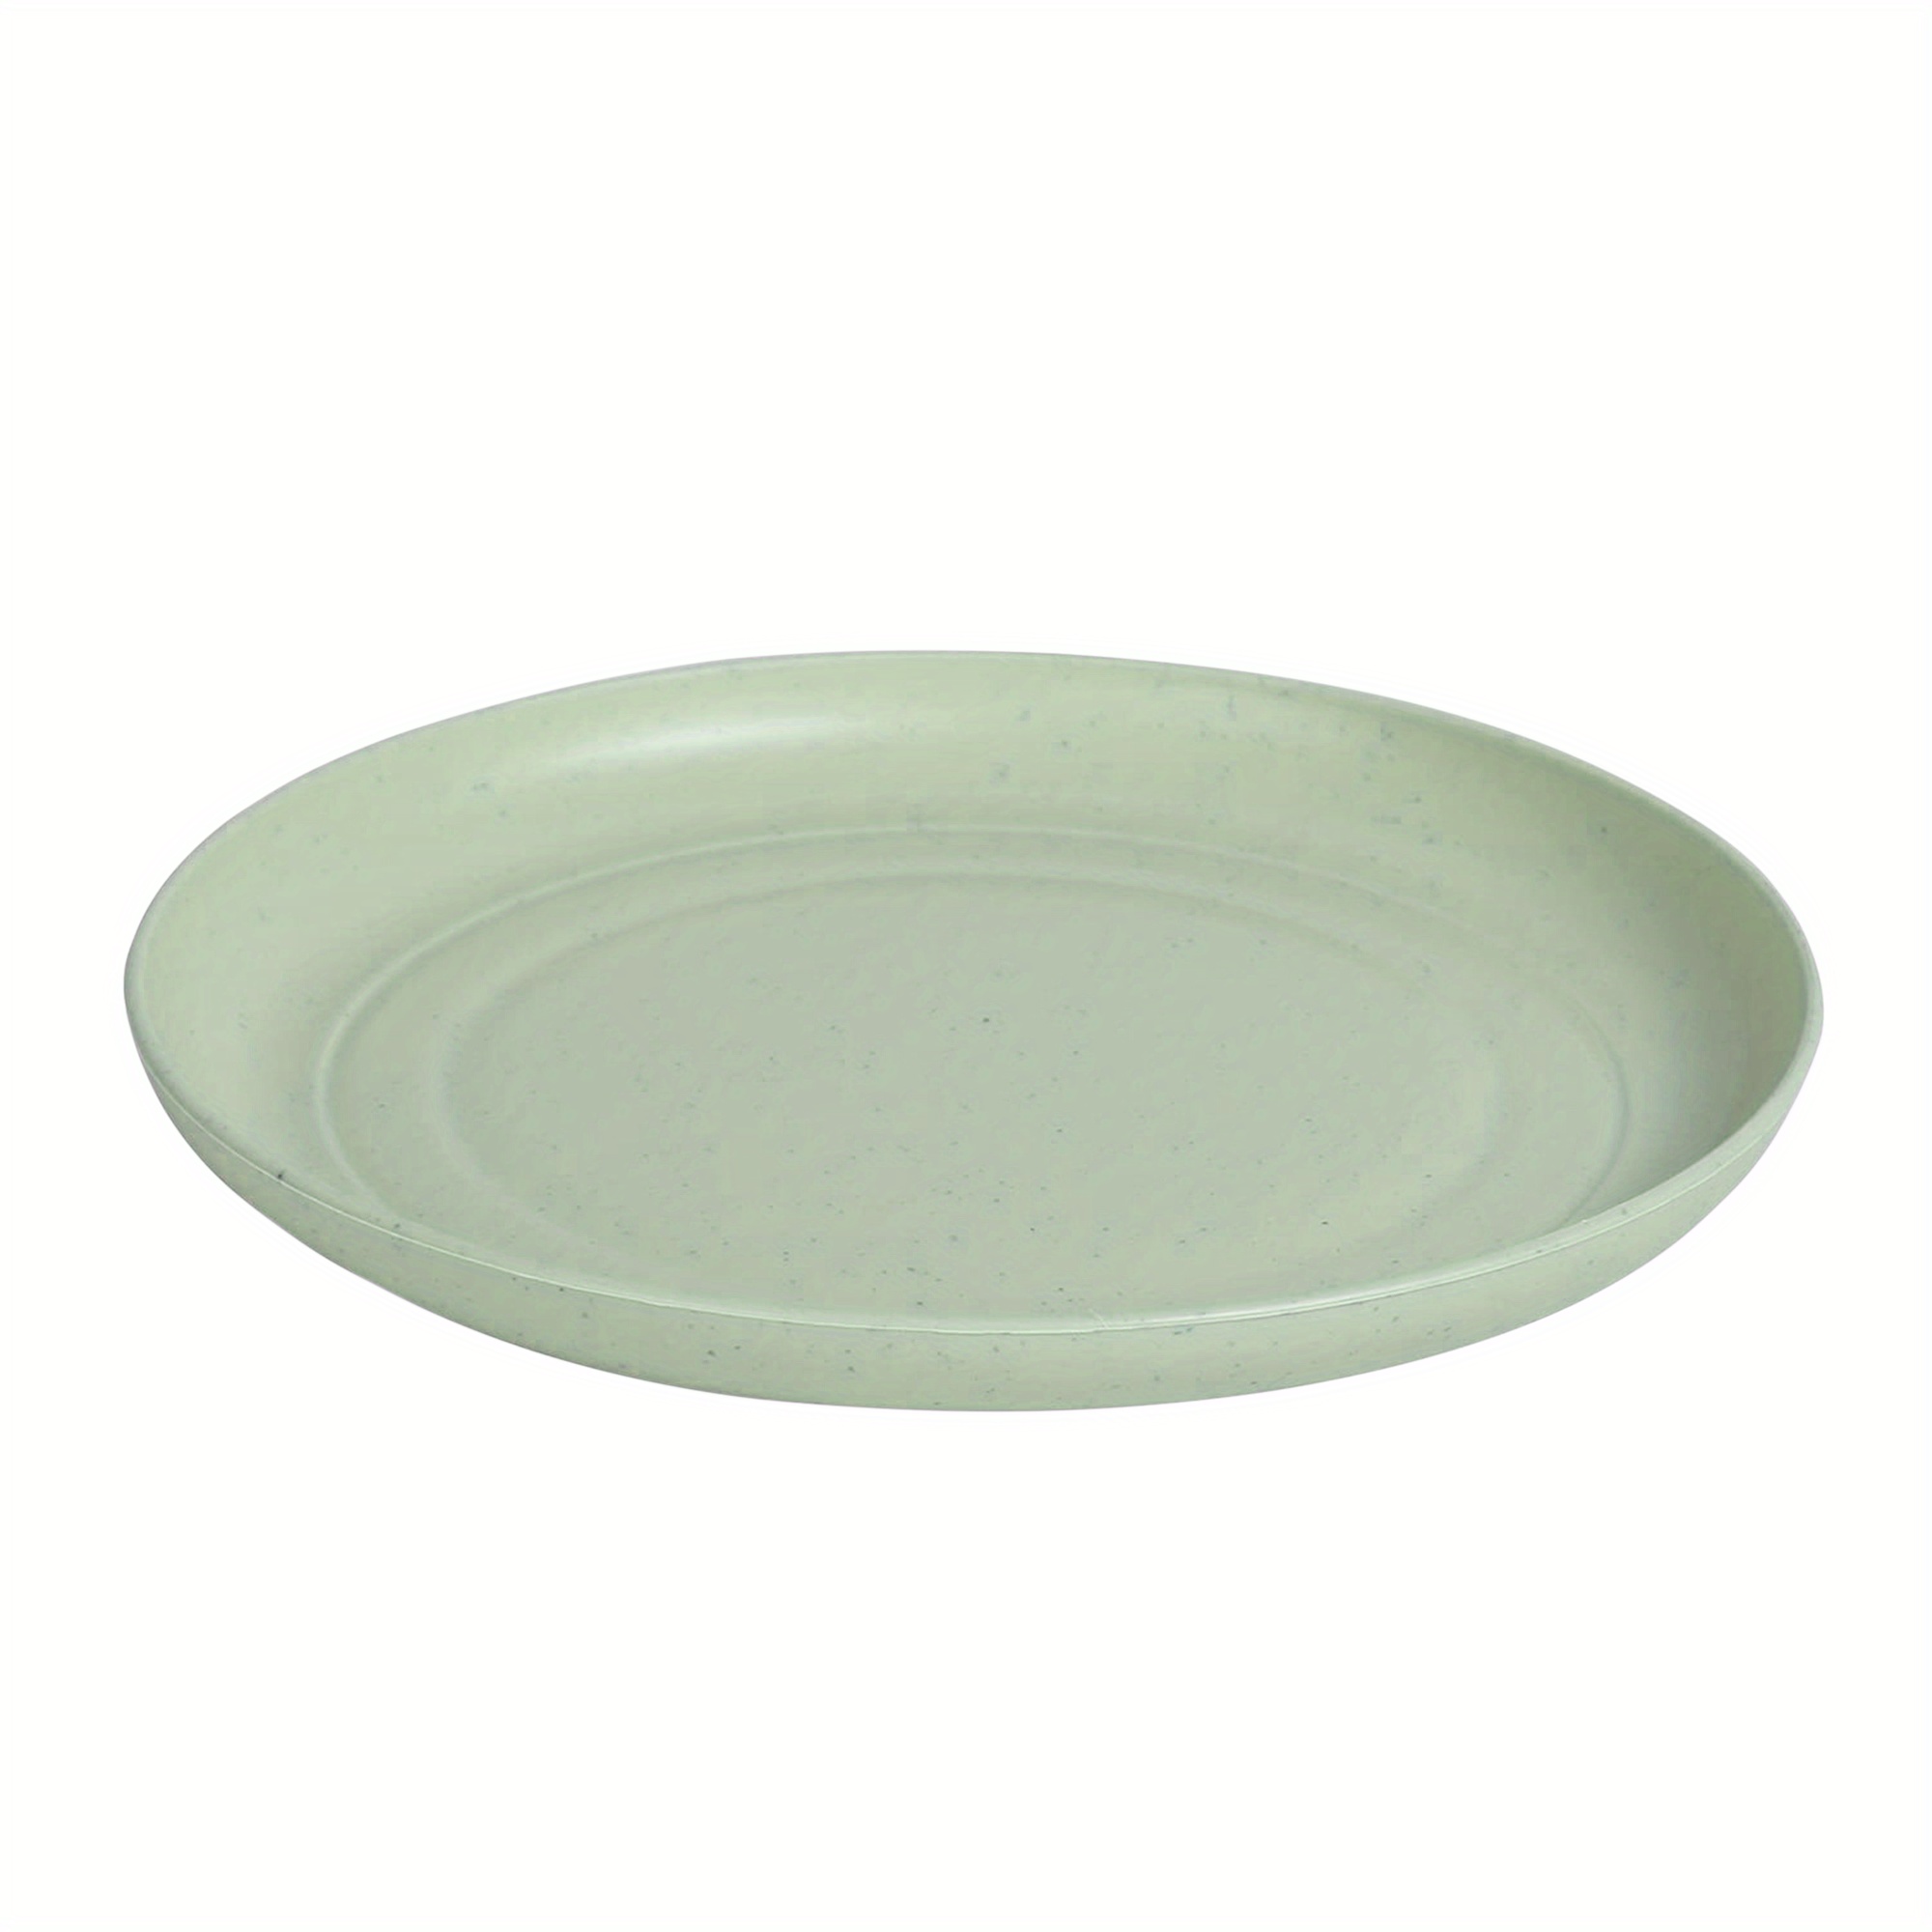 1pcs Food Dinner Plates Reusable, Unbreakable Plastic Dinner Plates,  Lightweight Camping Plates, Various Colors Microwave Plates, Kitchen Plates  Dishwasher Safe. White